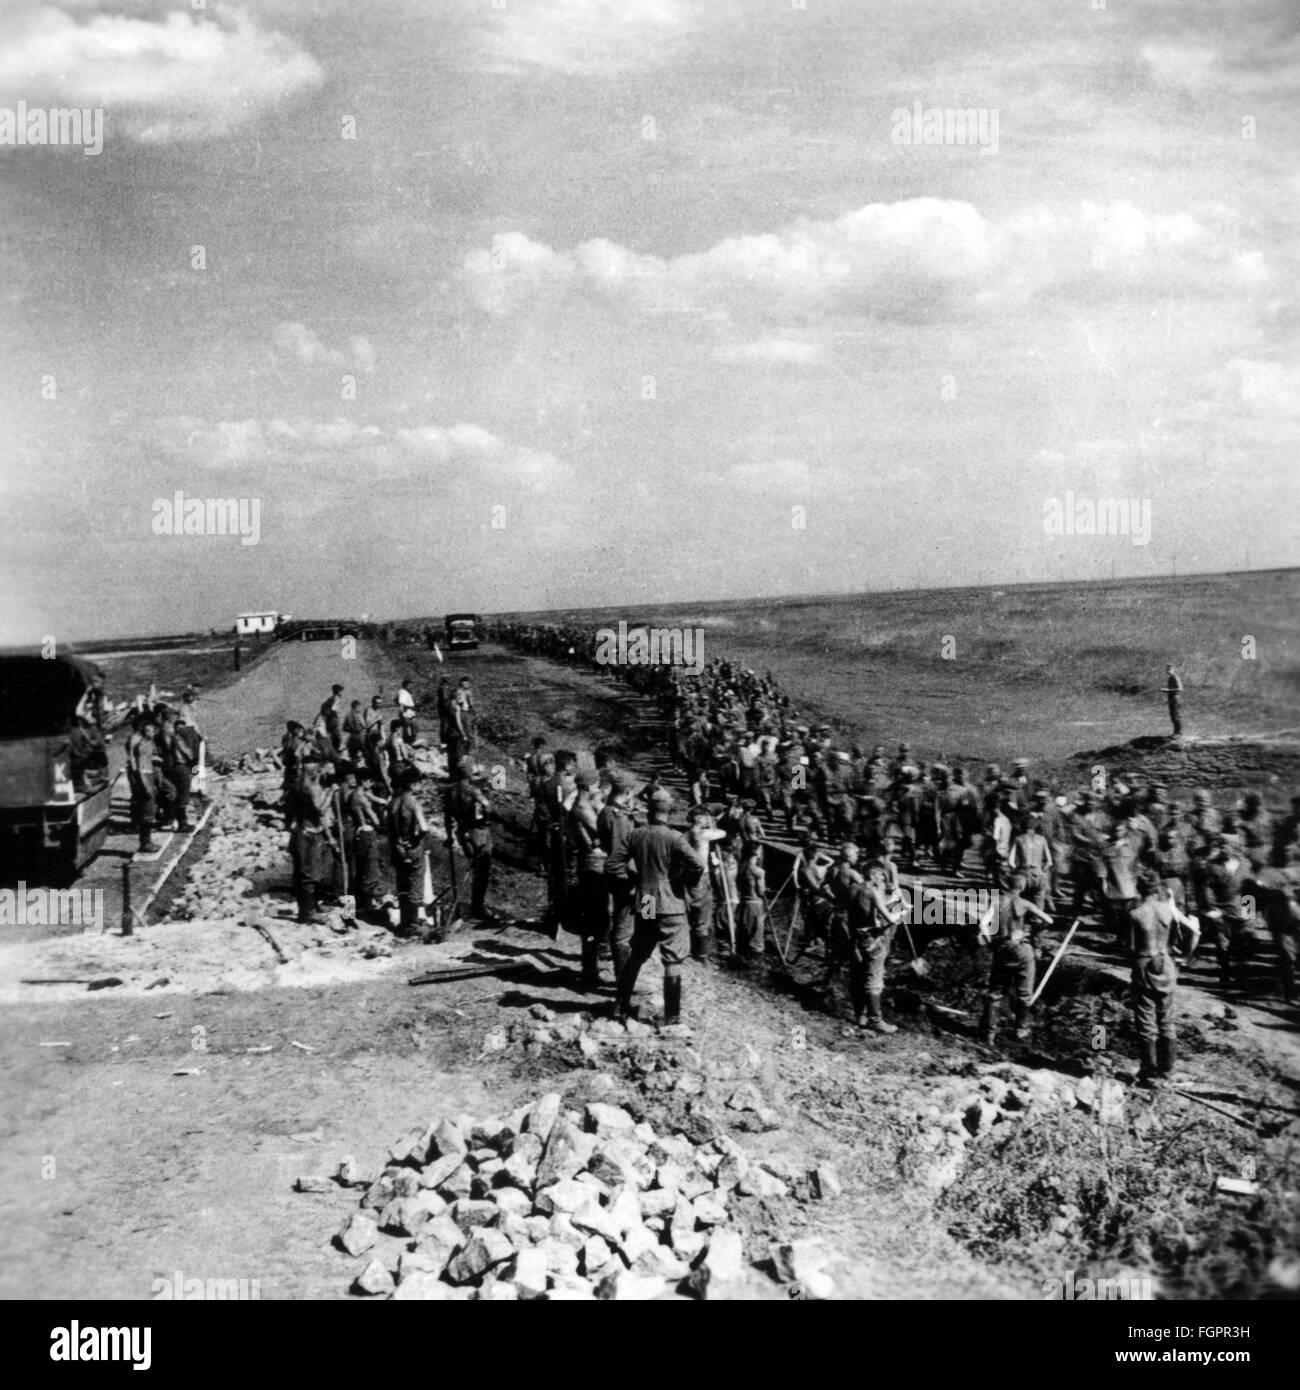 Second World War / WWII, Soviet Union, summer 1941, members of a Reichsarbeitsdienst (Reich Labor Service) unit, deployed on the Eastern Front (Abteilung K. 1/130), working on a road, column of Soviet prisoners of war marching by, Additional-Rights-Clearences-Not Available Stock Photo